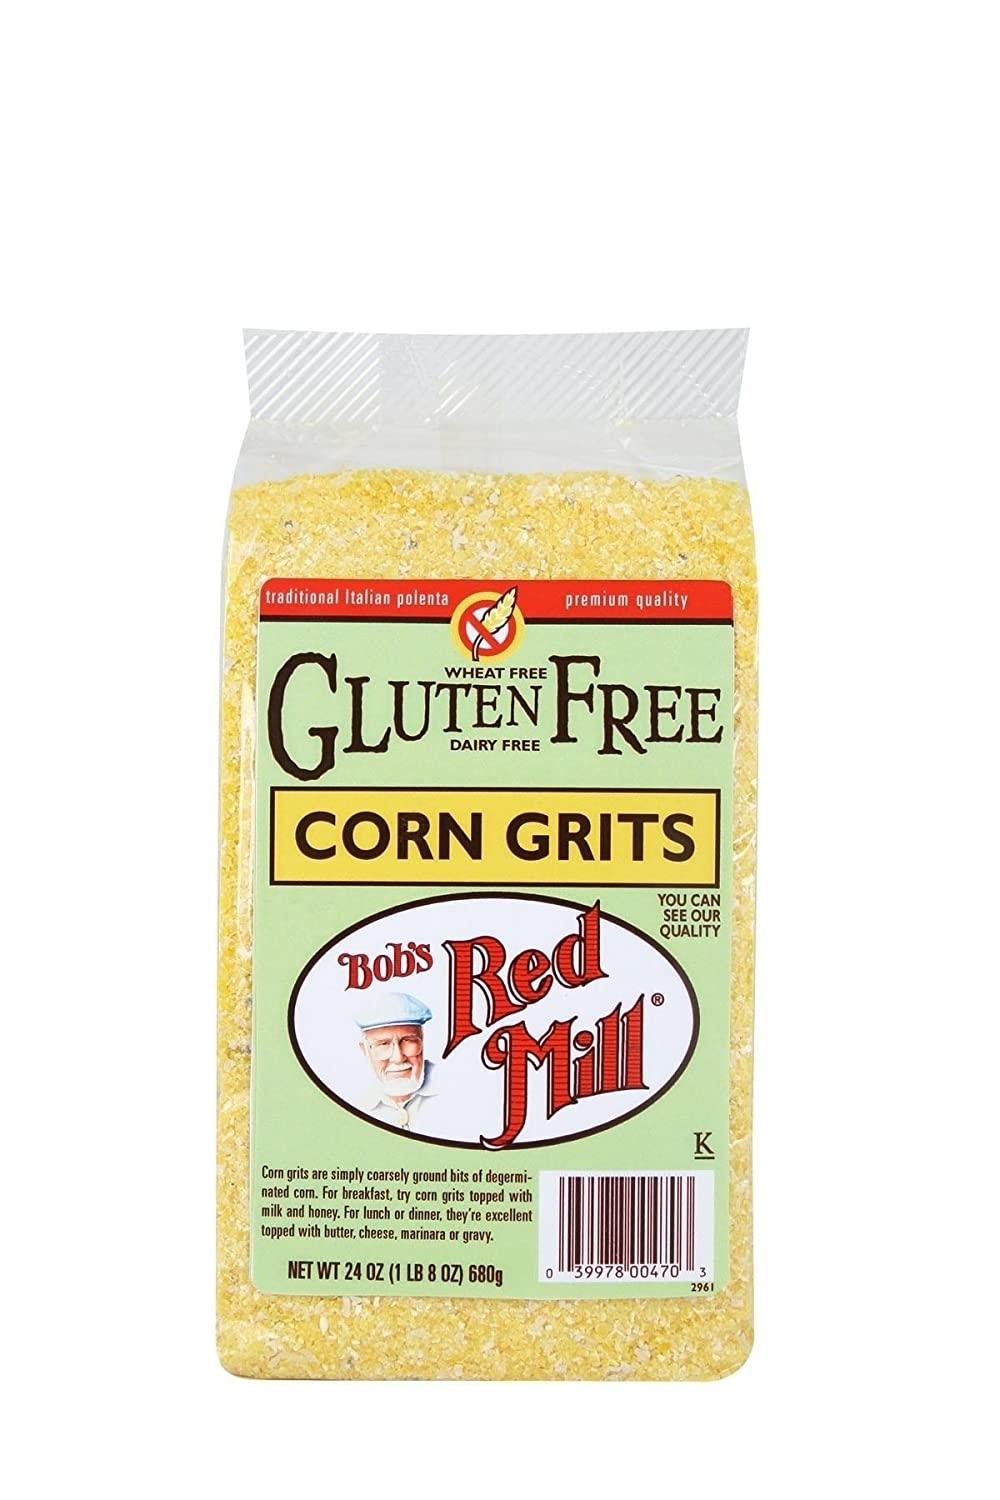 Bob S Red Mill Gluten Free Corn Grits Polenta 24 Oz Pack Of 4 1 5 Pound Pack Of 4